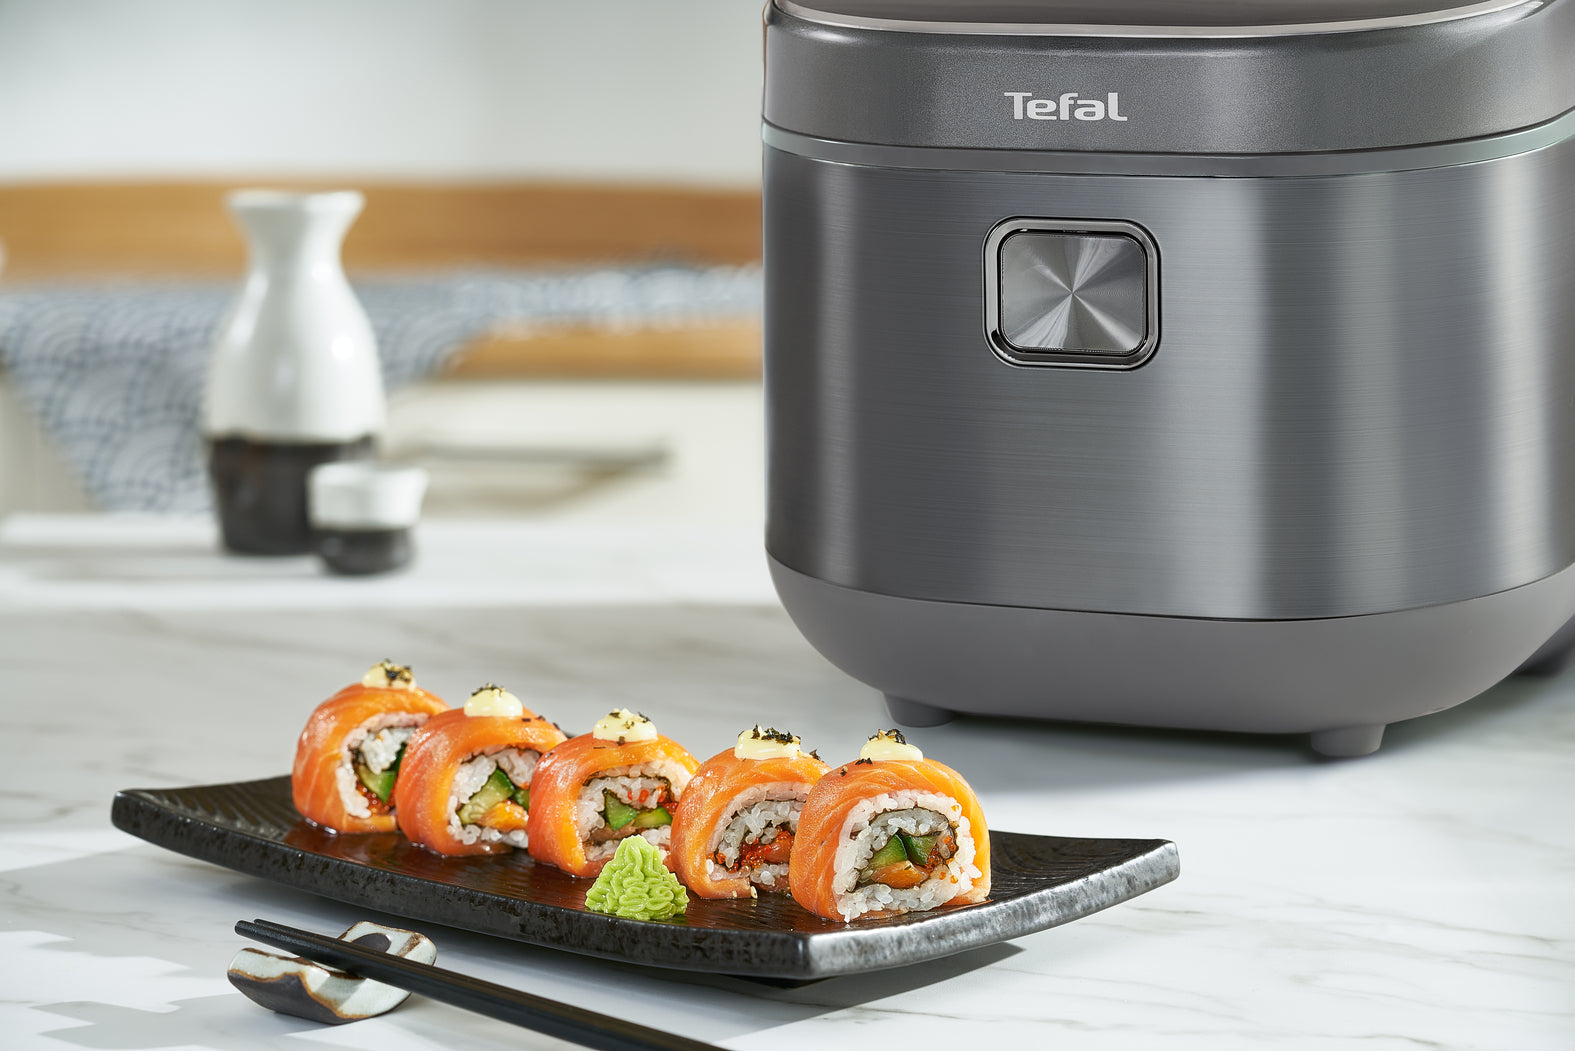 Tefal Induction Rice Master & Slow Cooker RK818